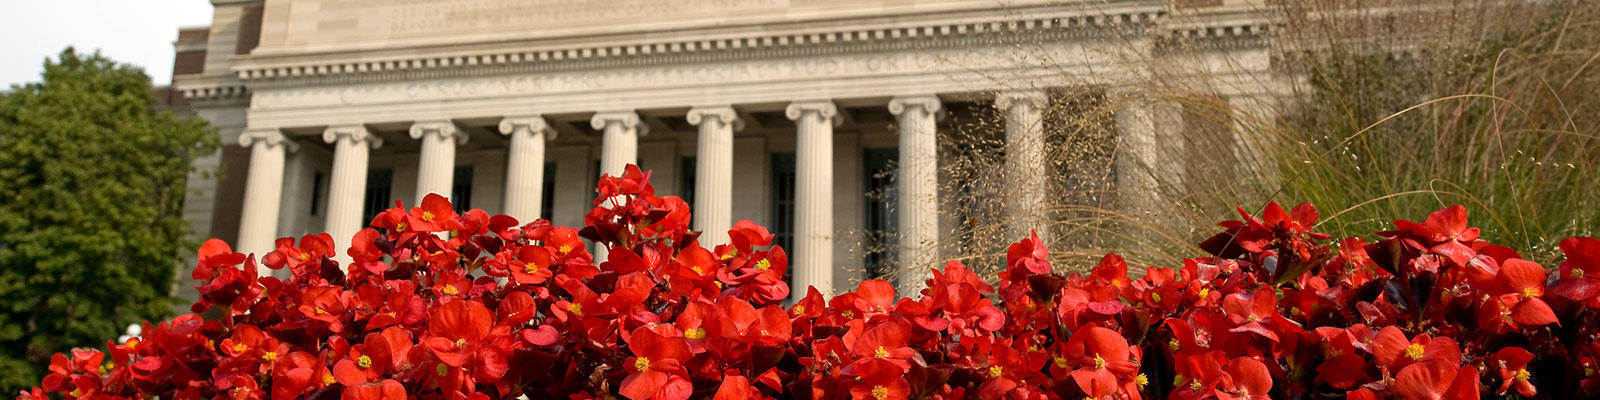 red flowers in bloom in front of the columns of Northrop Auditorium